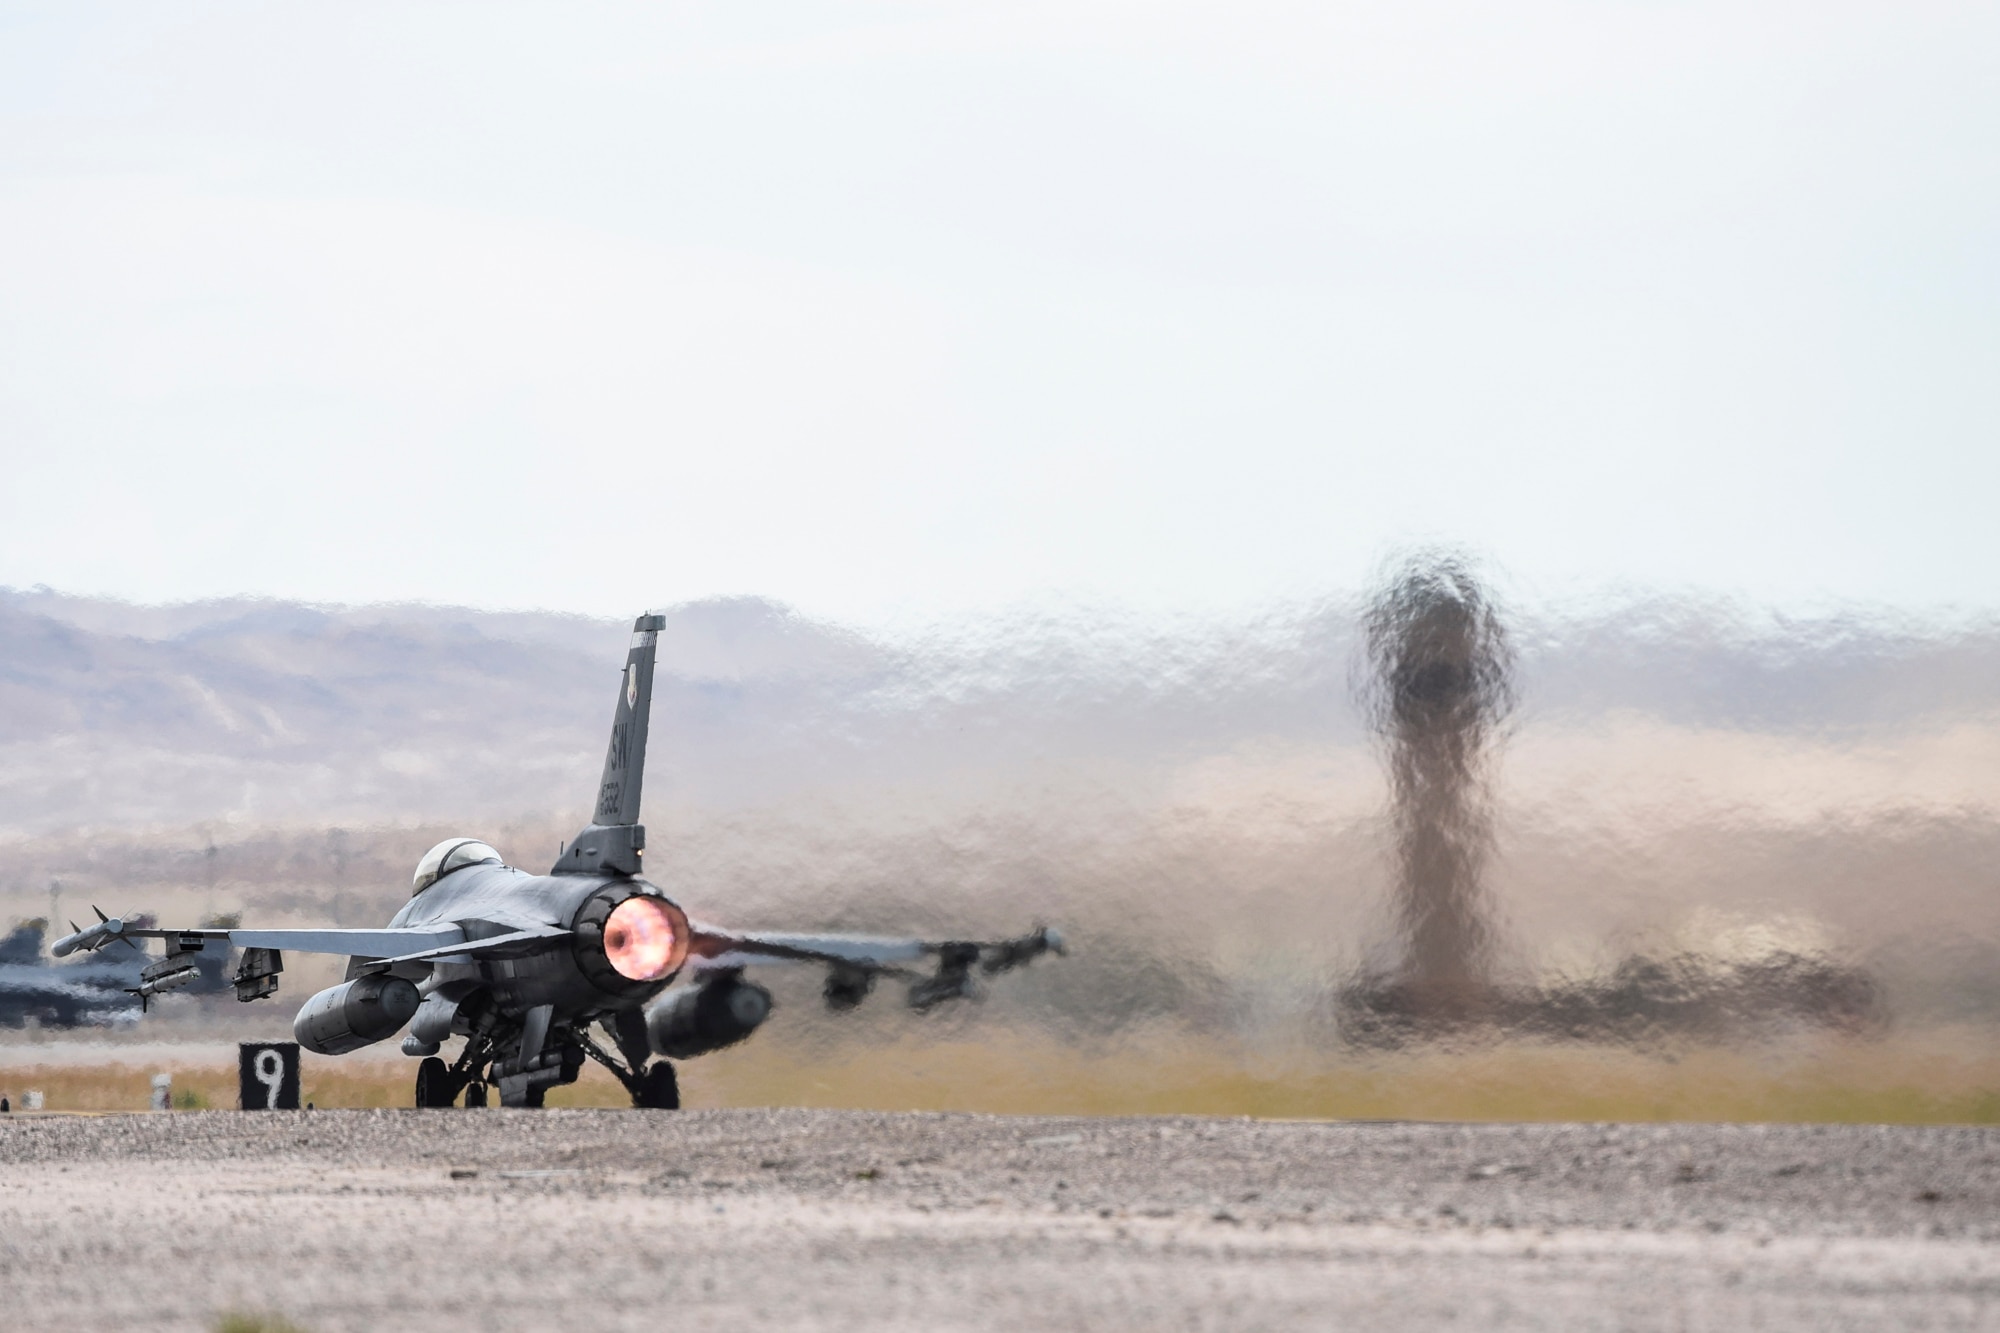 An F-16 Fighting Falcon from the 55th Fighter Squadron, Shaw Air Force Base, S.C., takes off during Red Flag 17-3 at Nellis Air Force Base, Nev., July 24, 2017. Dozens of units across the Department of Defense gathered at Nellis AFB to participate in Red Flag 17-3, the Air Force’s premier multi-domain integration combat training exercise. (U.S. Air Force photo by Airman 1st Class Andrew D. Sarver/Releaesd)